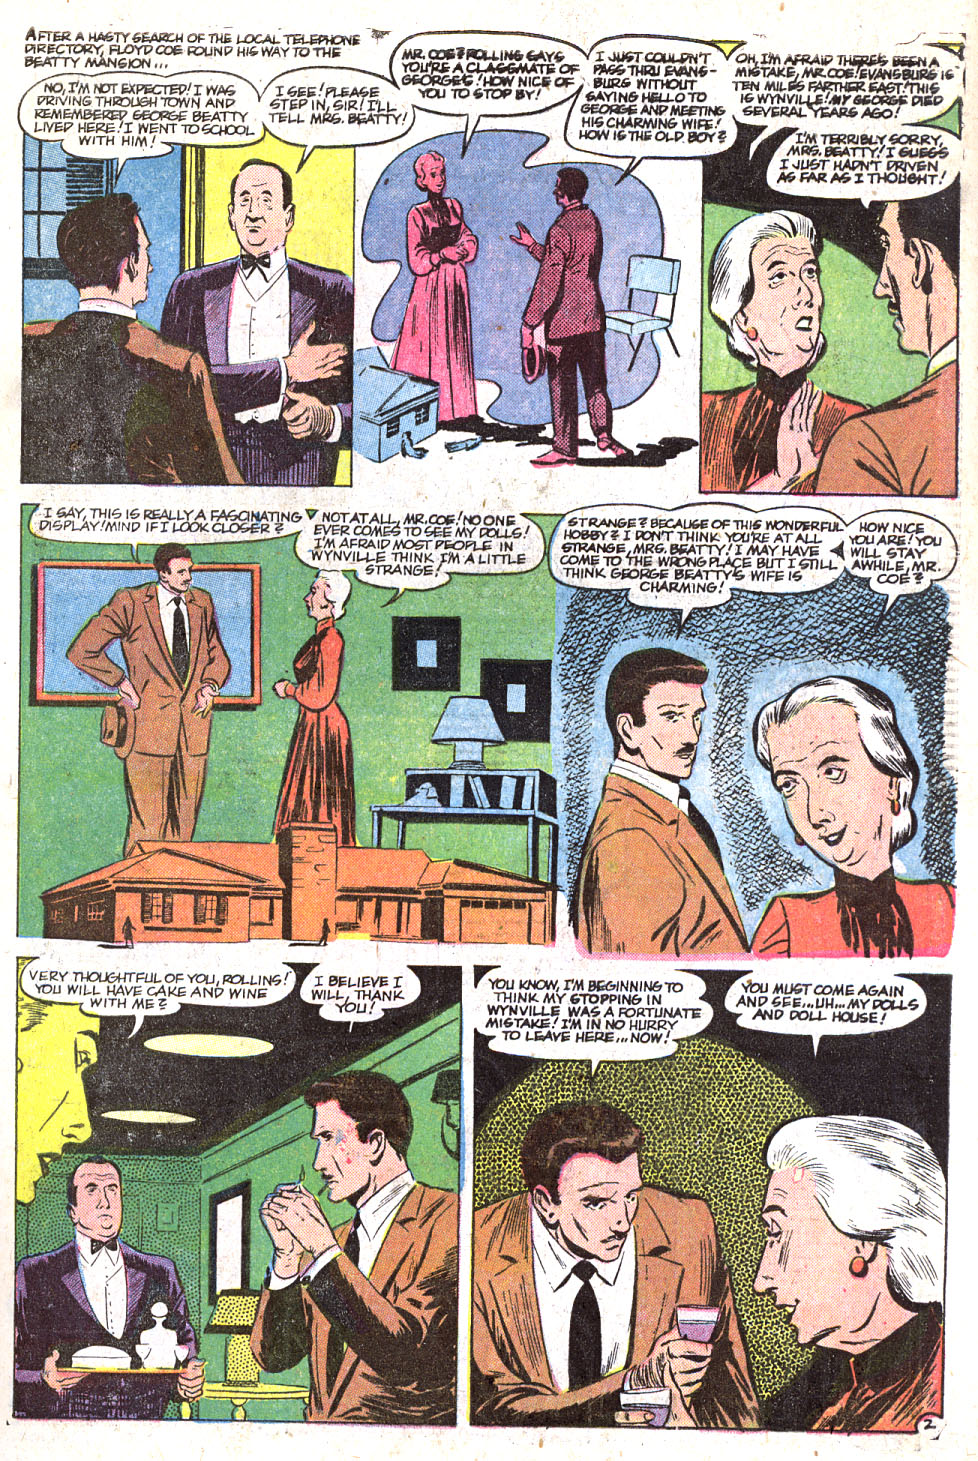 Journey Into Mystery (1952) 48 Page 8